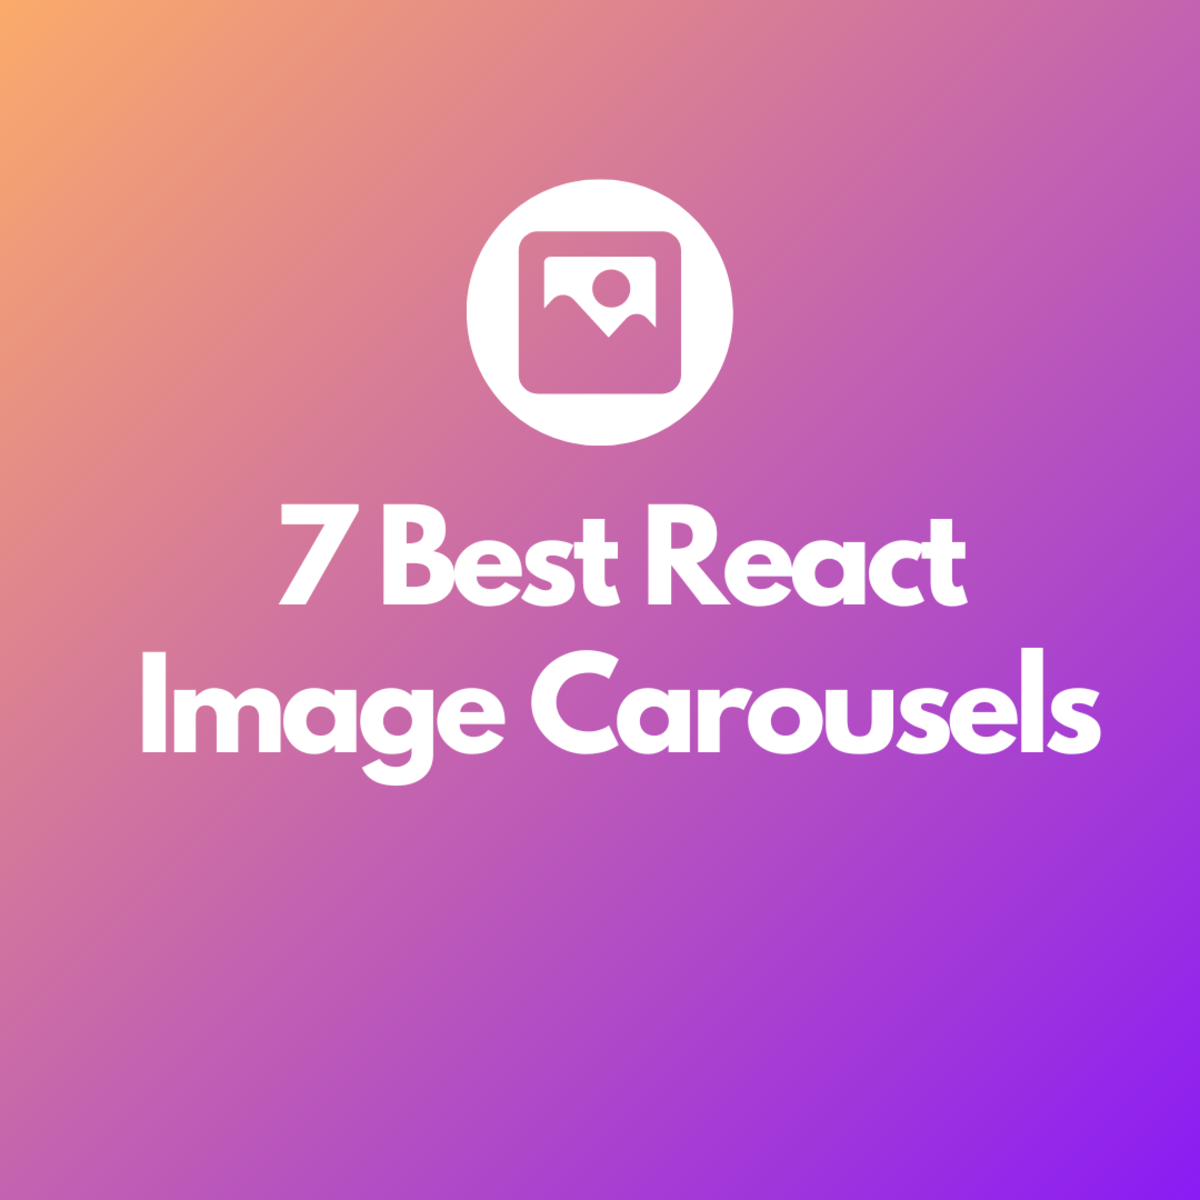 Discover some of the best React image carousels in this ultimate list!